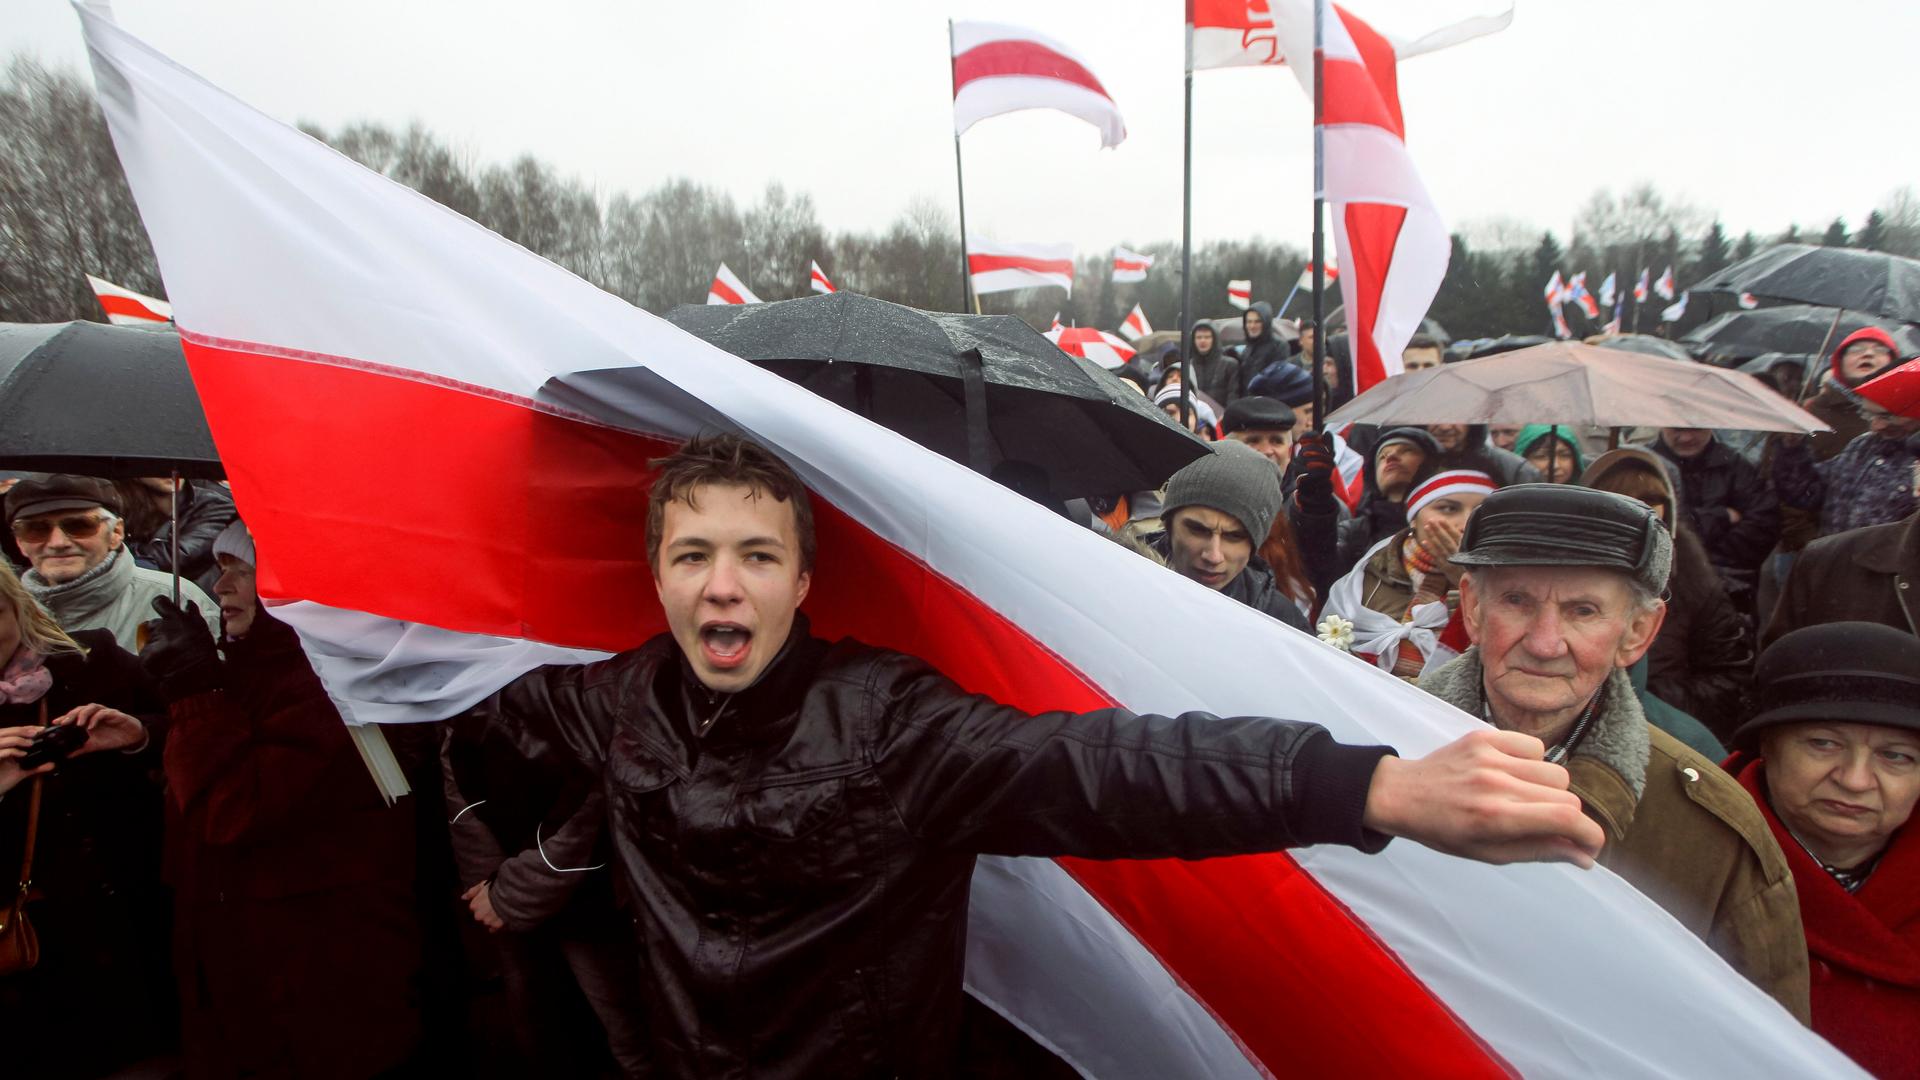 Man in black jacket holding red and white flag